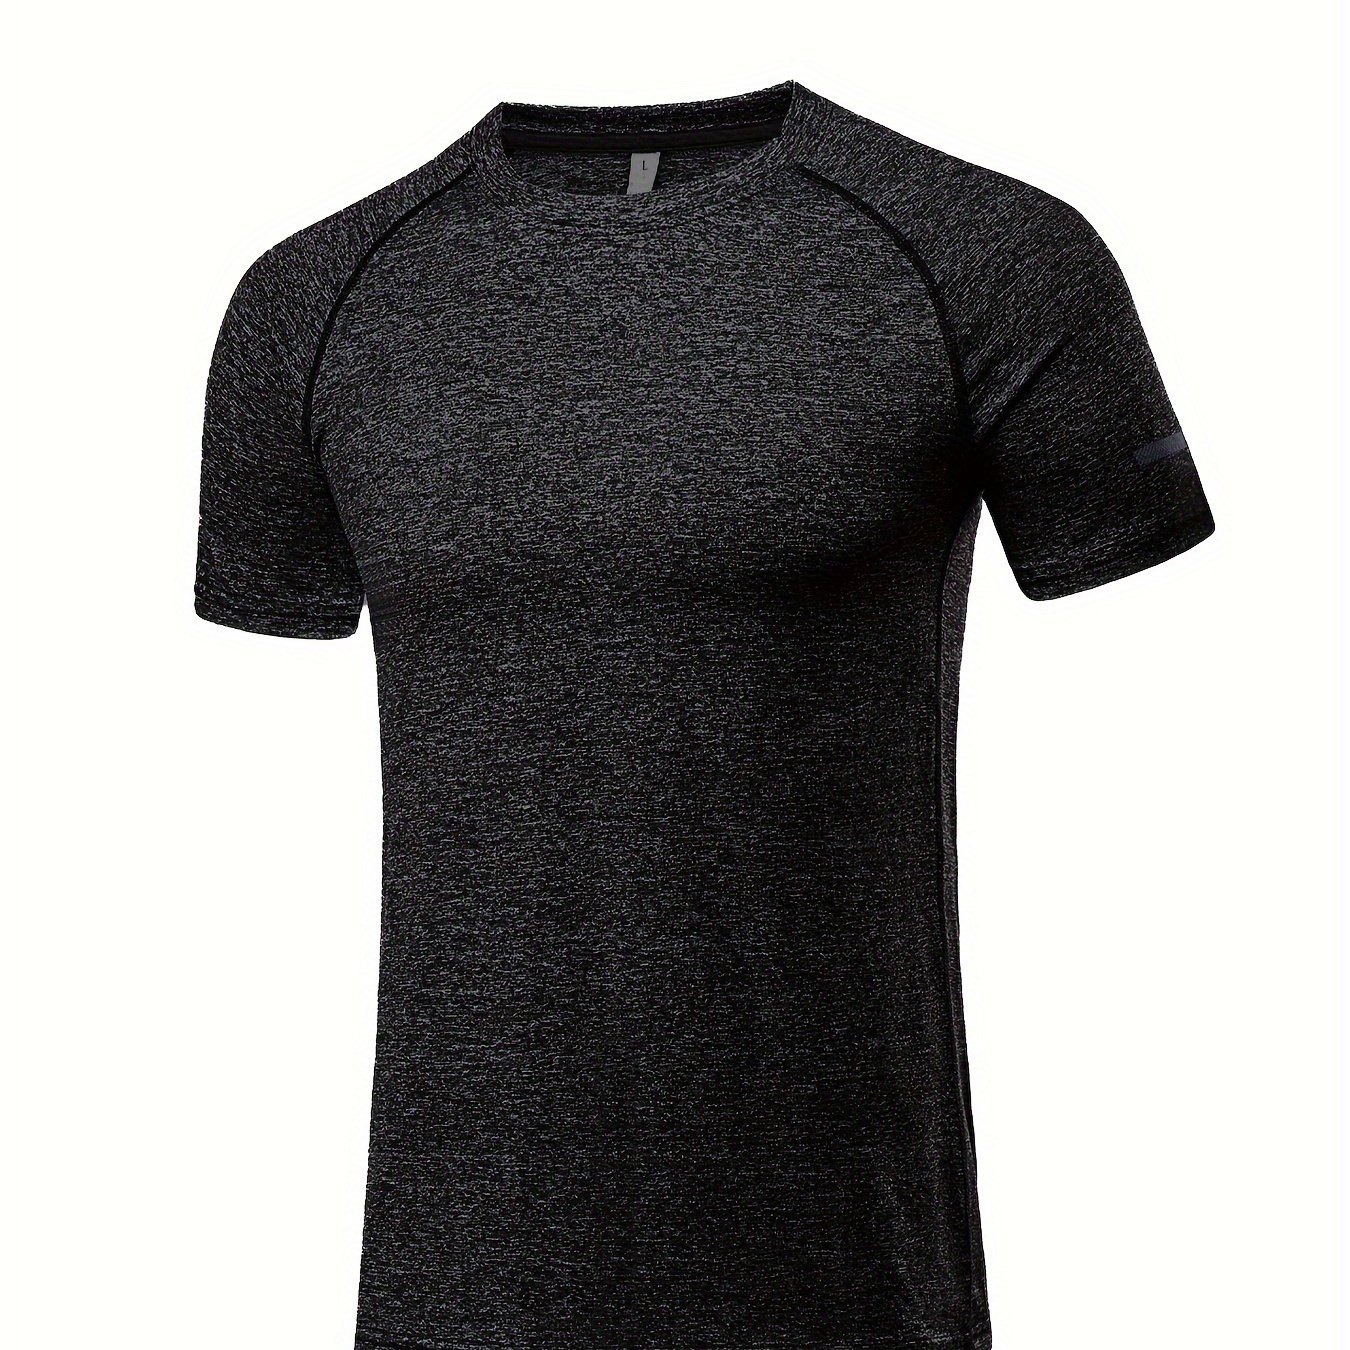 

Casual Stretch Men's Moisture Wicking Breathable Short Sleeve Round Neck T-shirt For Summer Gym Fitness Training